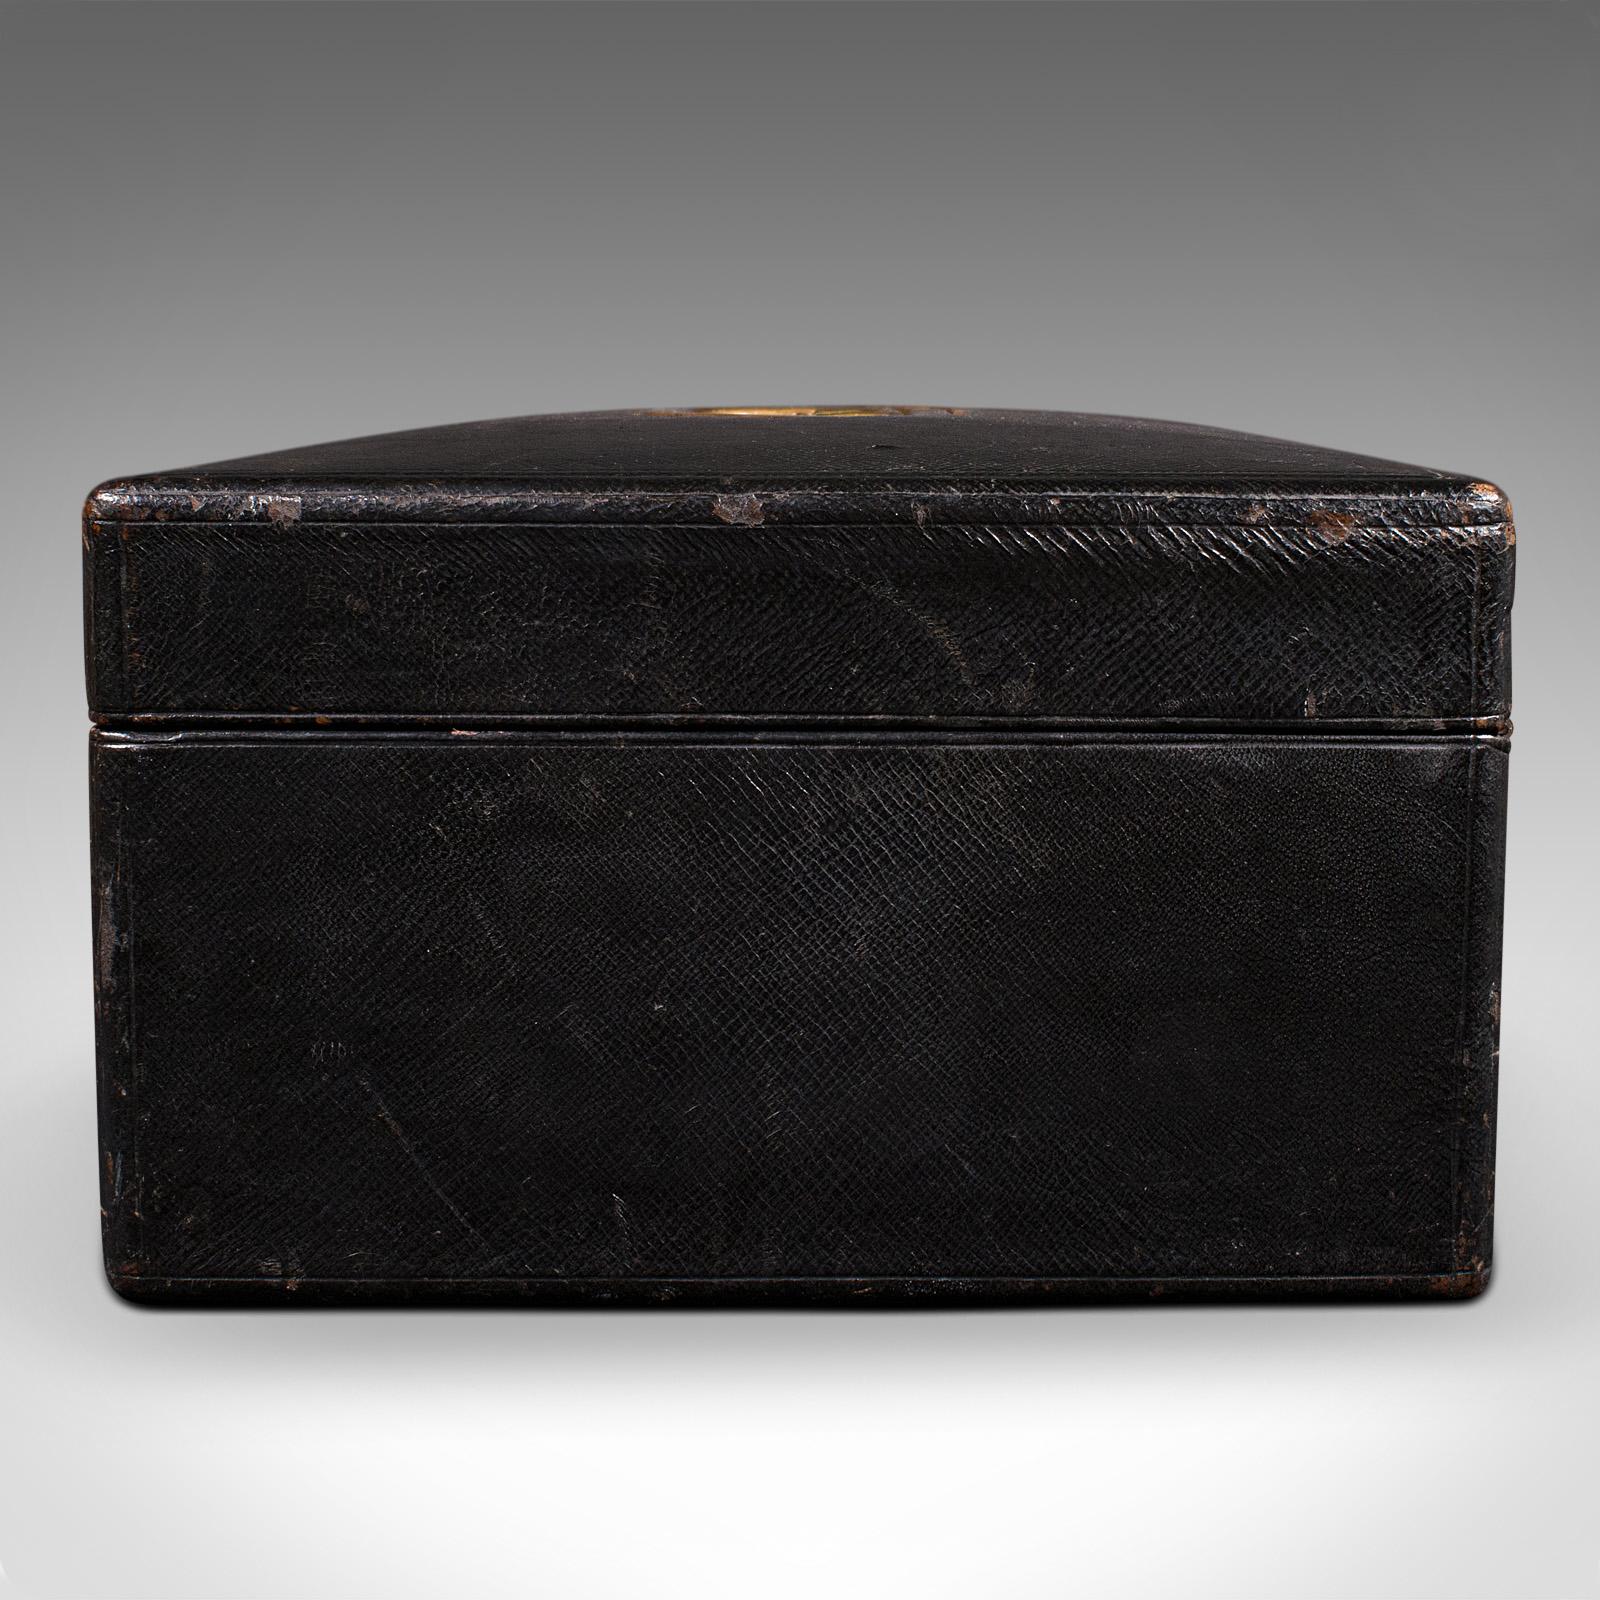 Antique Correspondence Box, English, Leather, Writing Case, Victorian, C.1890 In Good Condition For Sale In Hele, Devon, GB